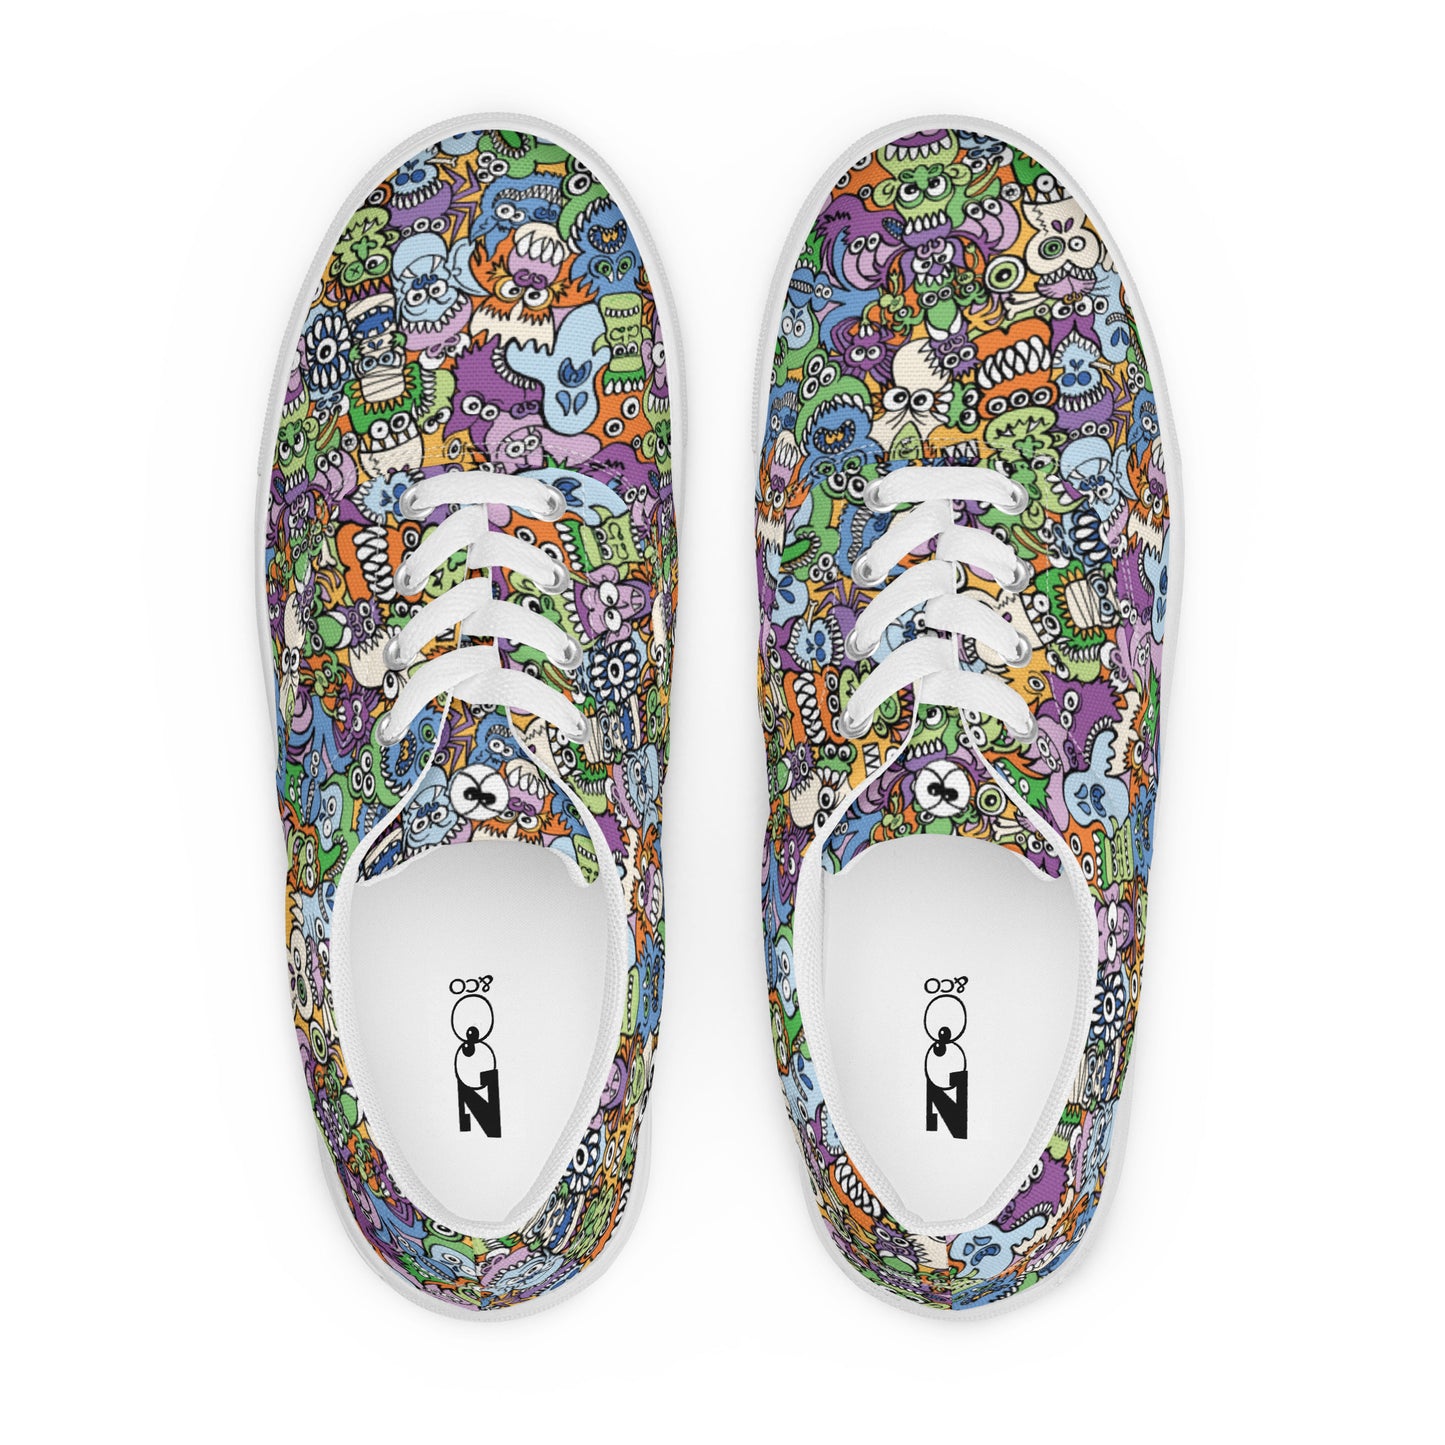 All the spooky Halloween monsters in a pattern design Men’s lace-up canvas shoes. Top view